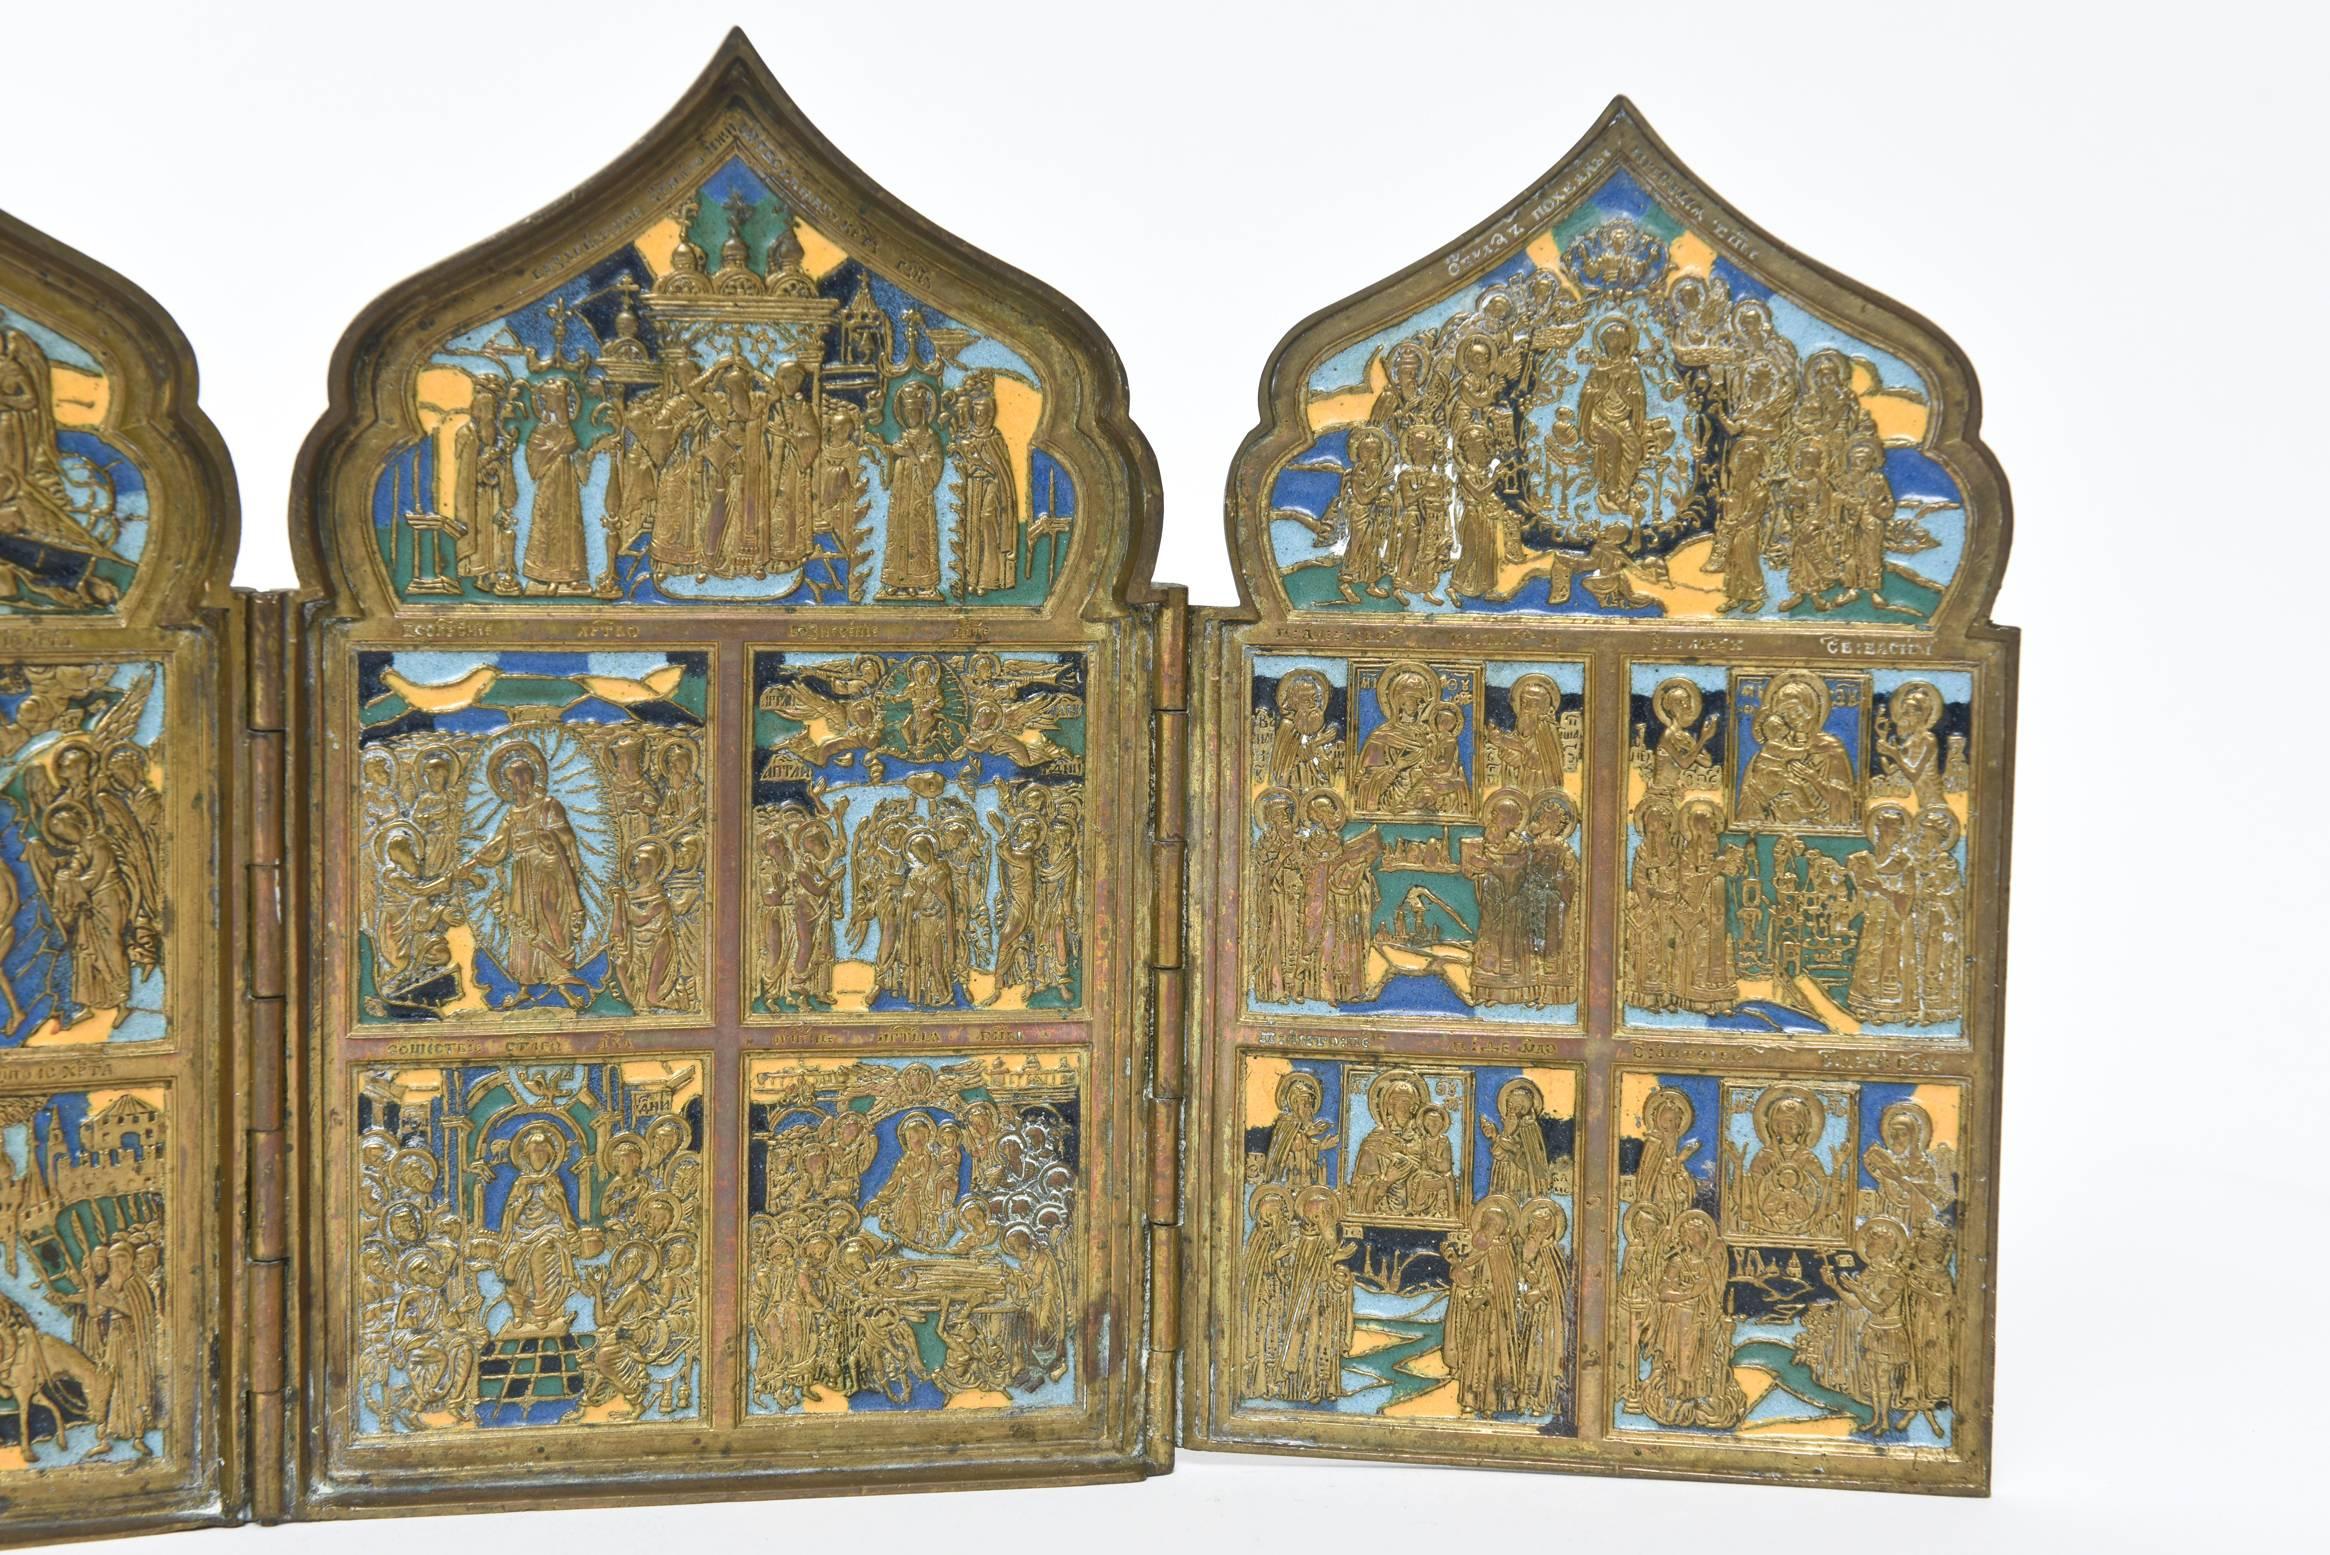 This finely made 19th century Sladen traveling icon has four folding panels representing 